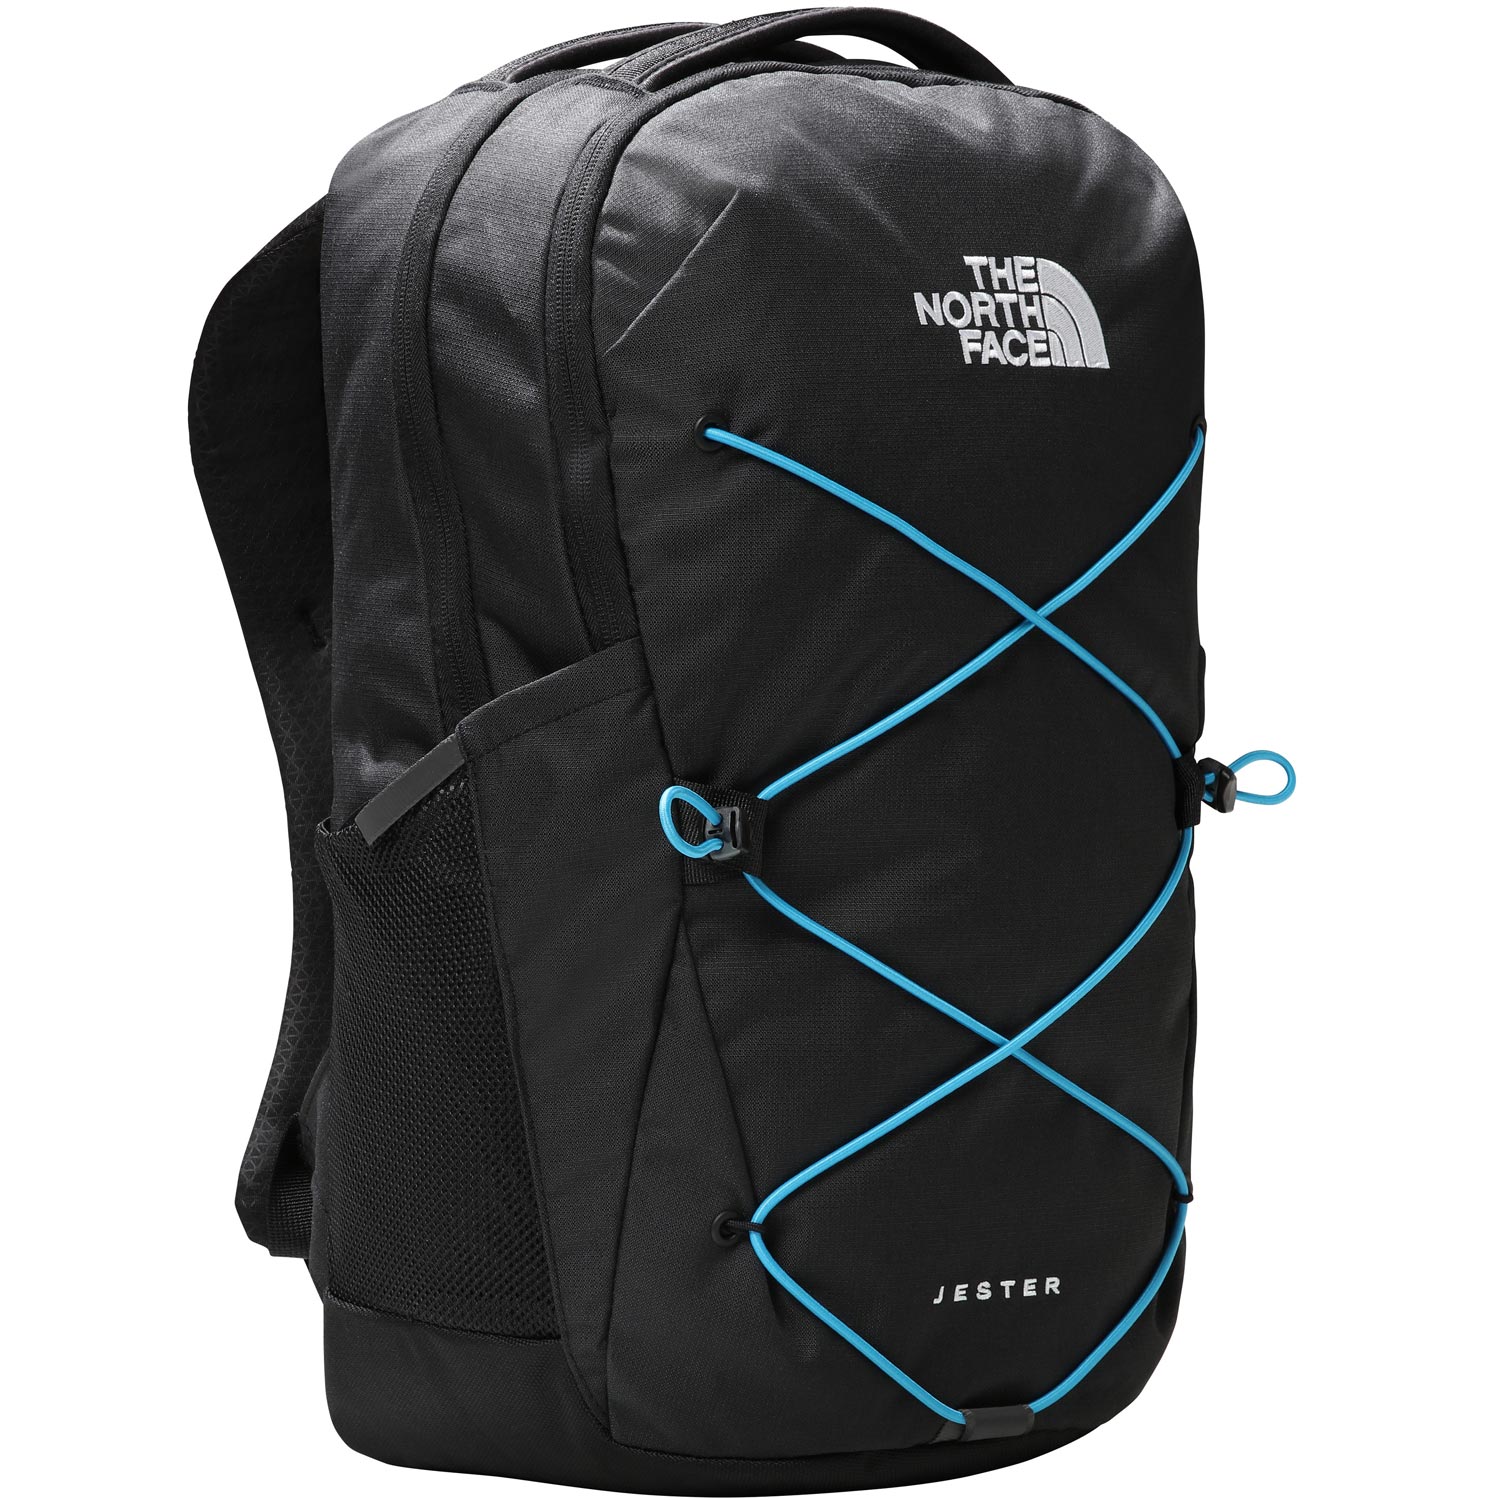 The North Face Rucksack Jester Black Heather-Acoustic